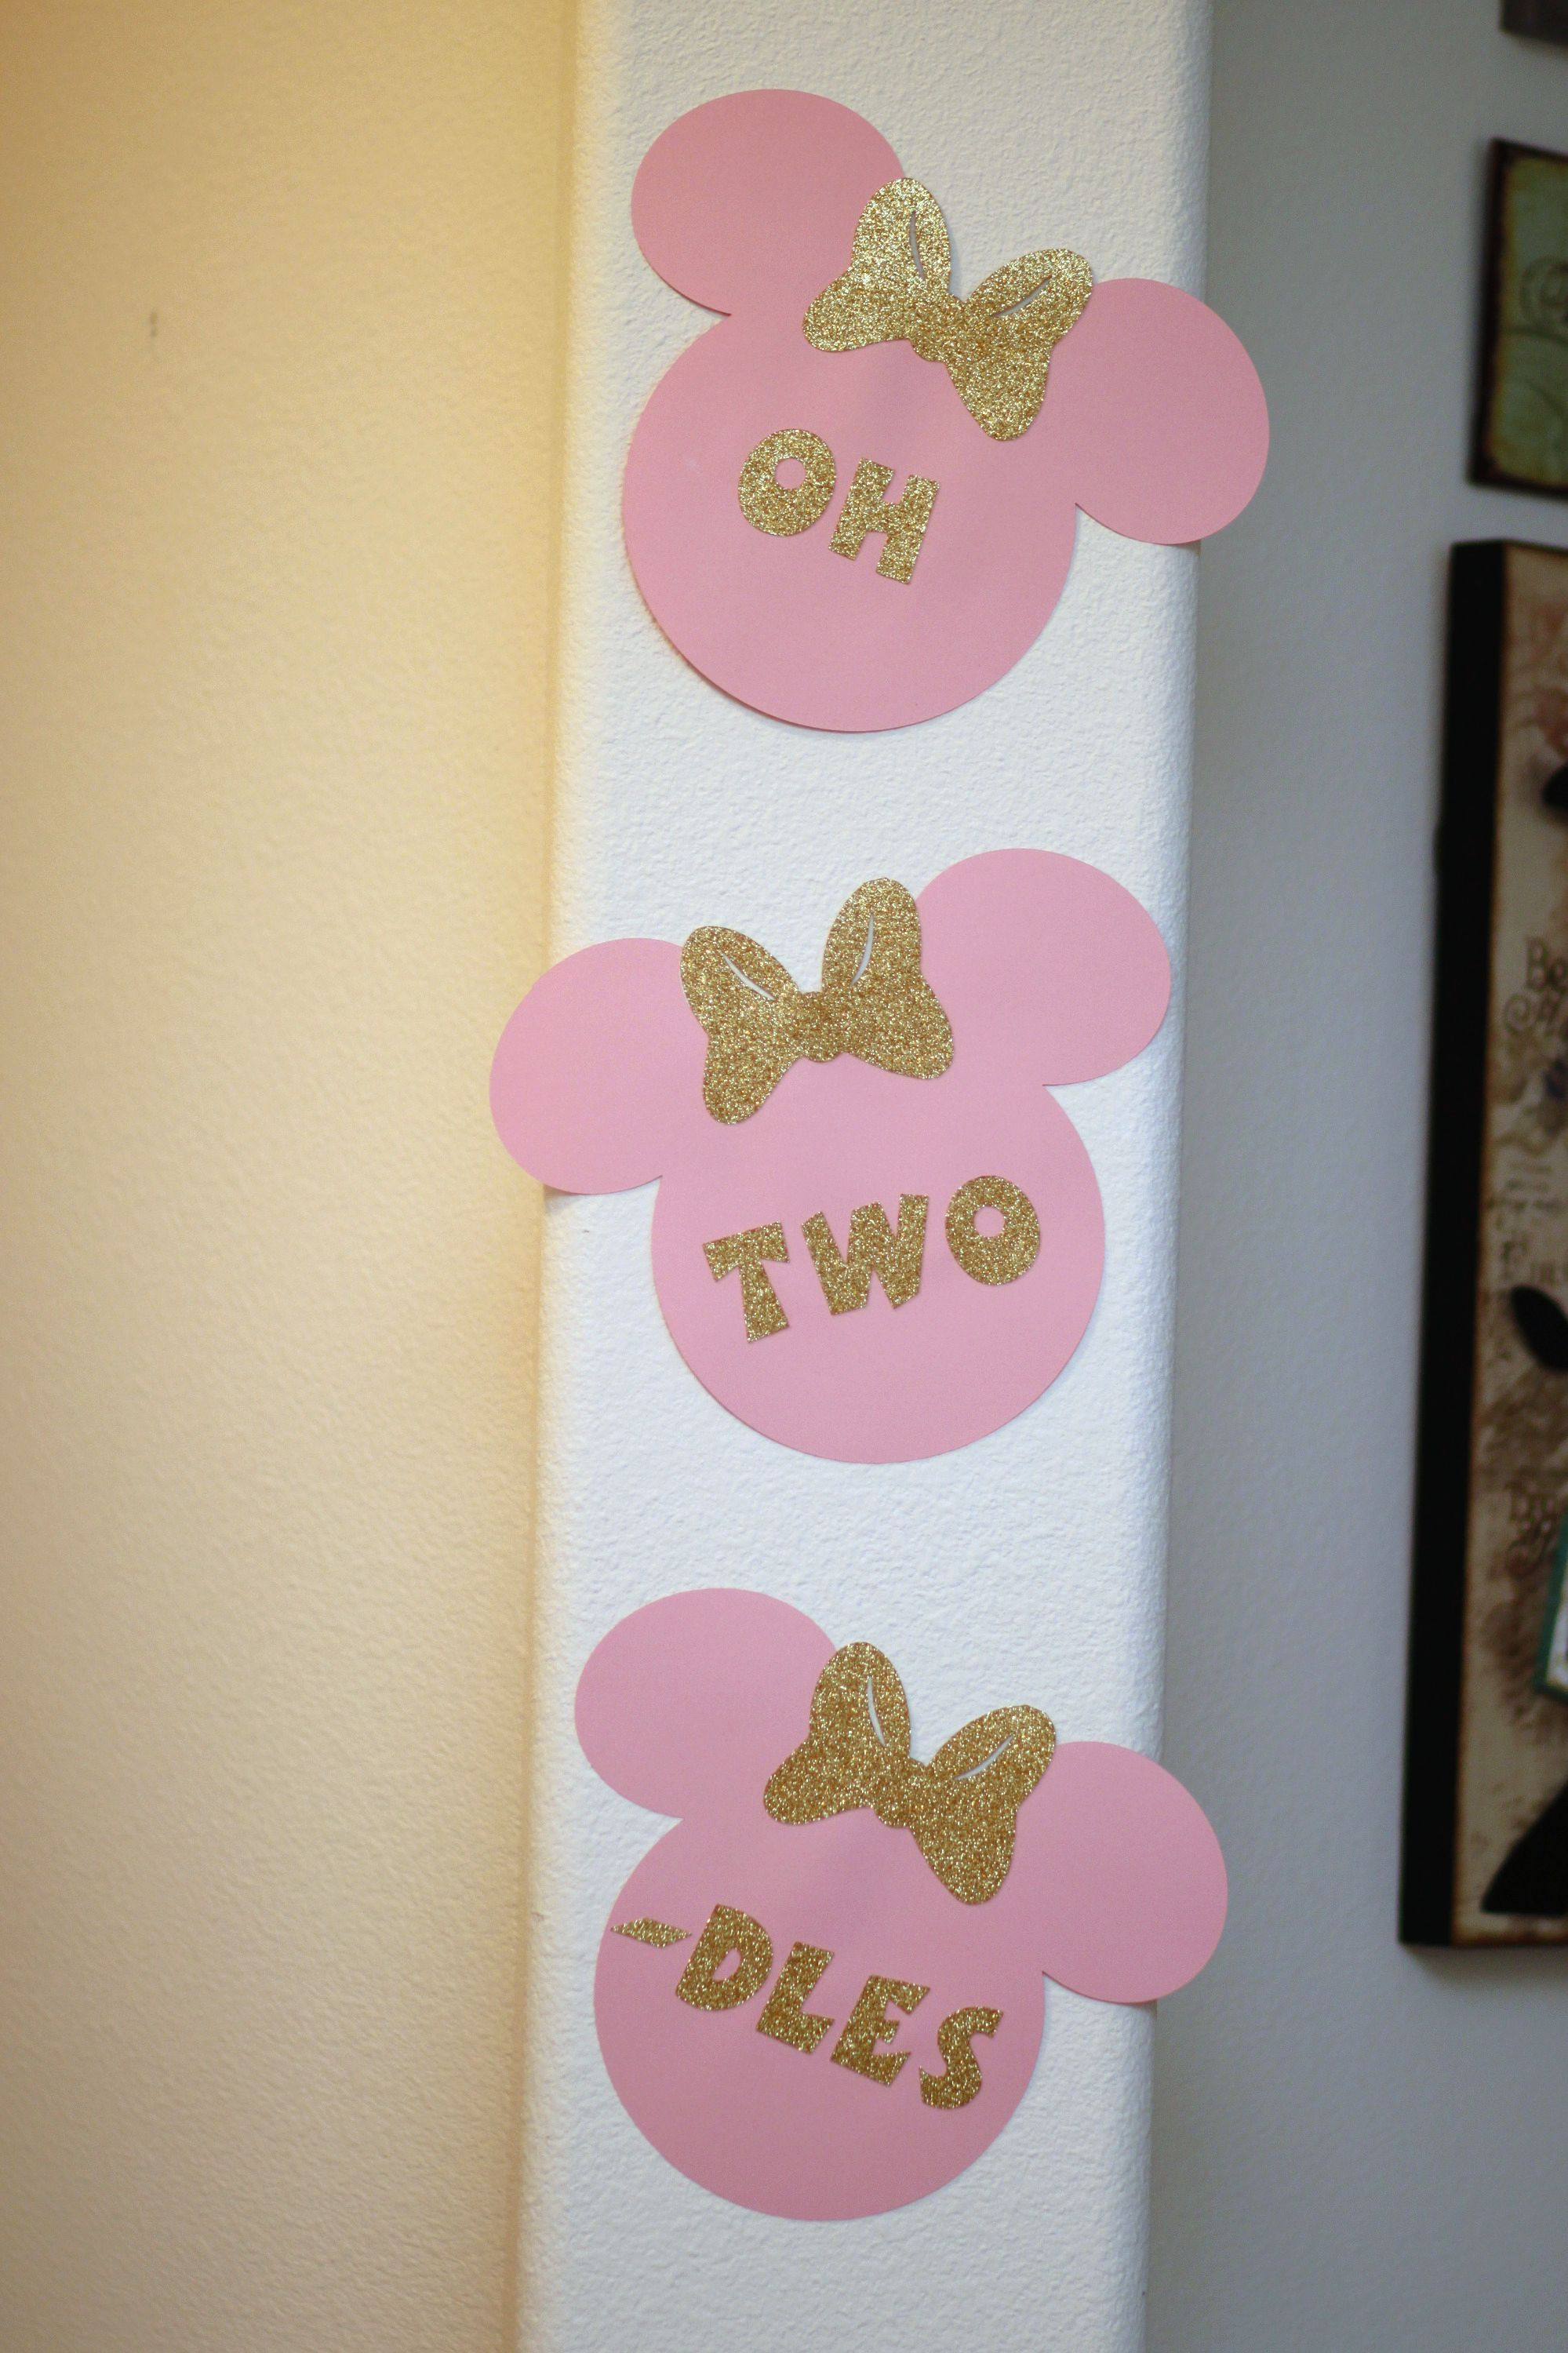 Oh, Two-dles decor